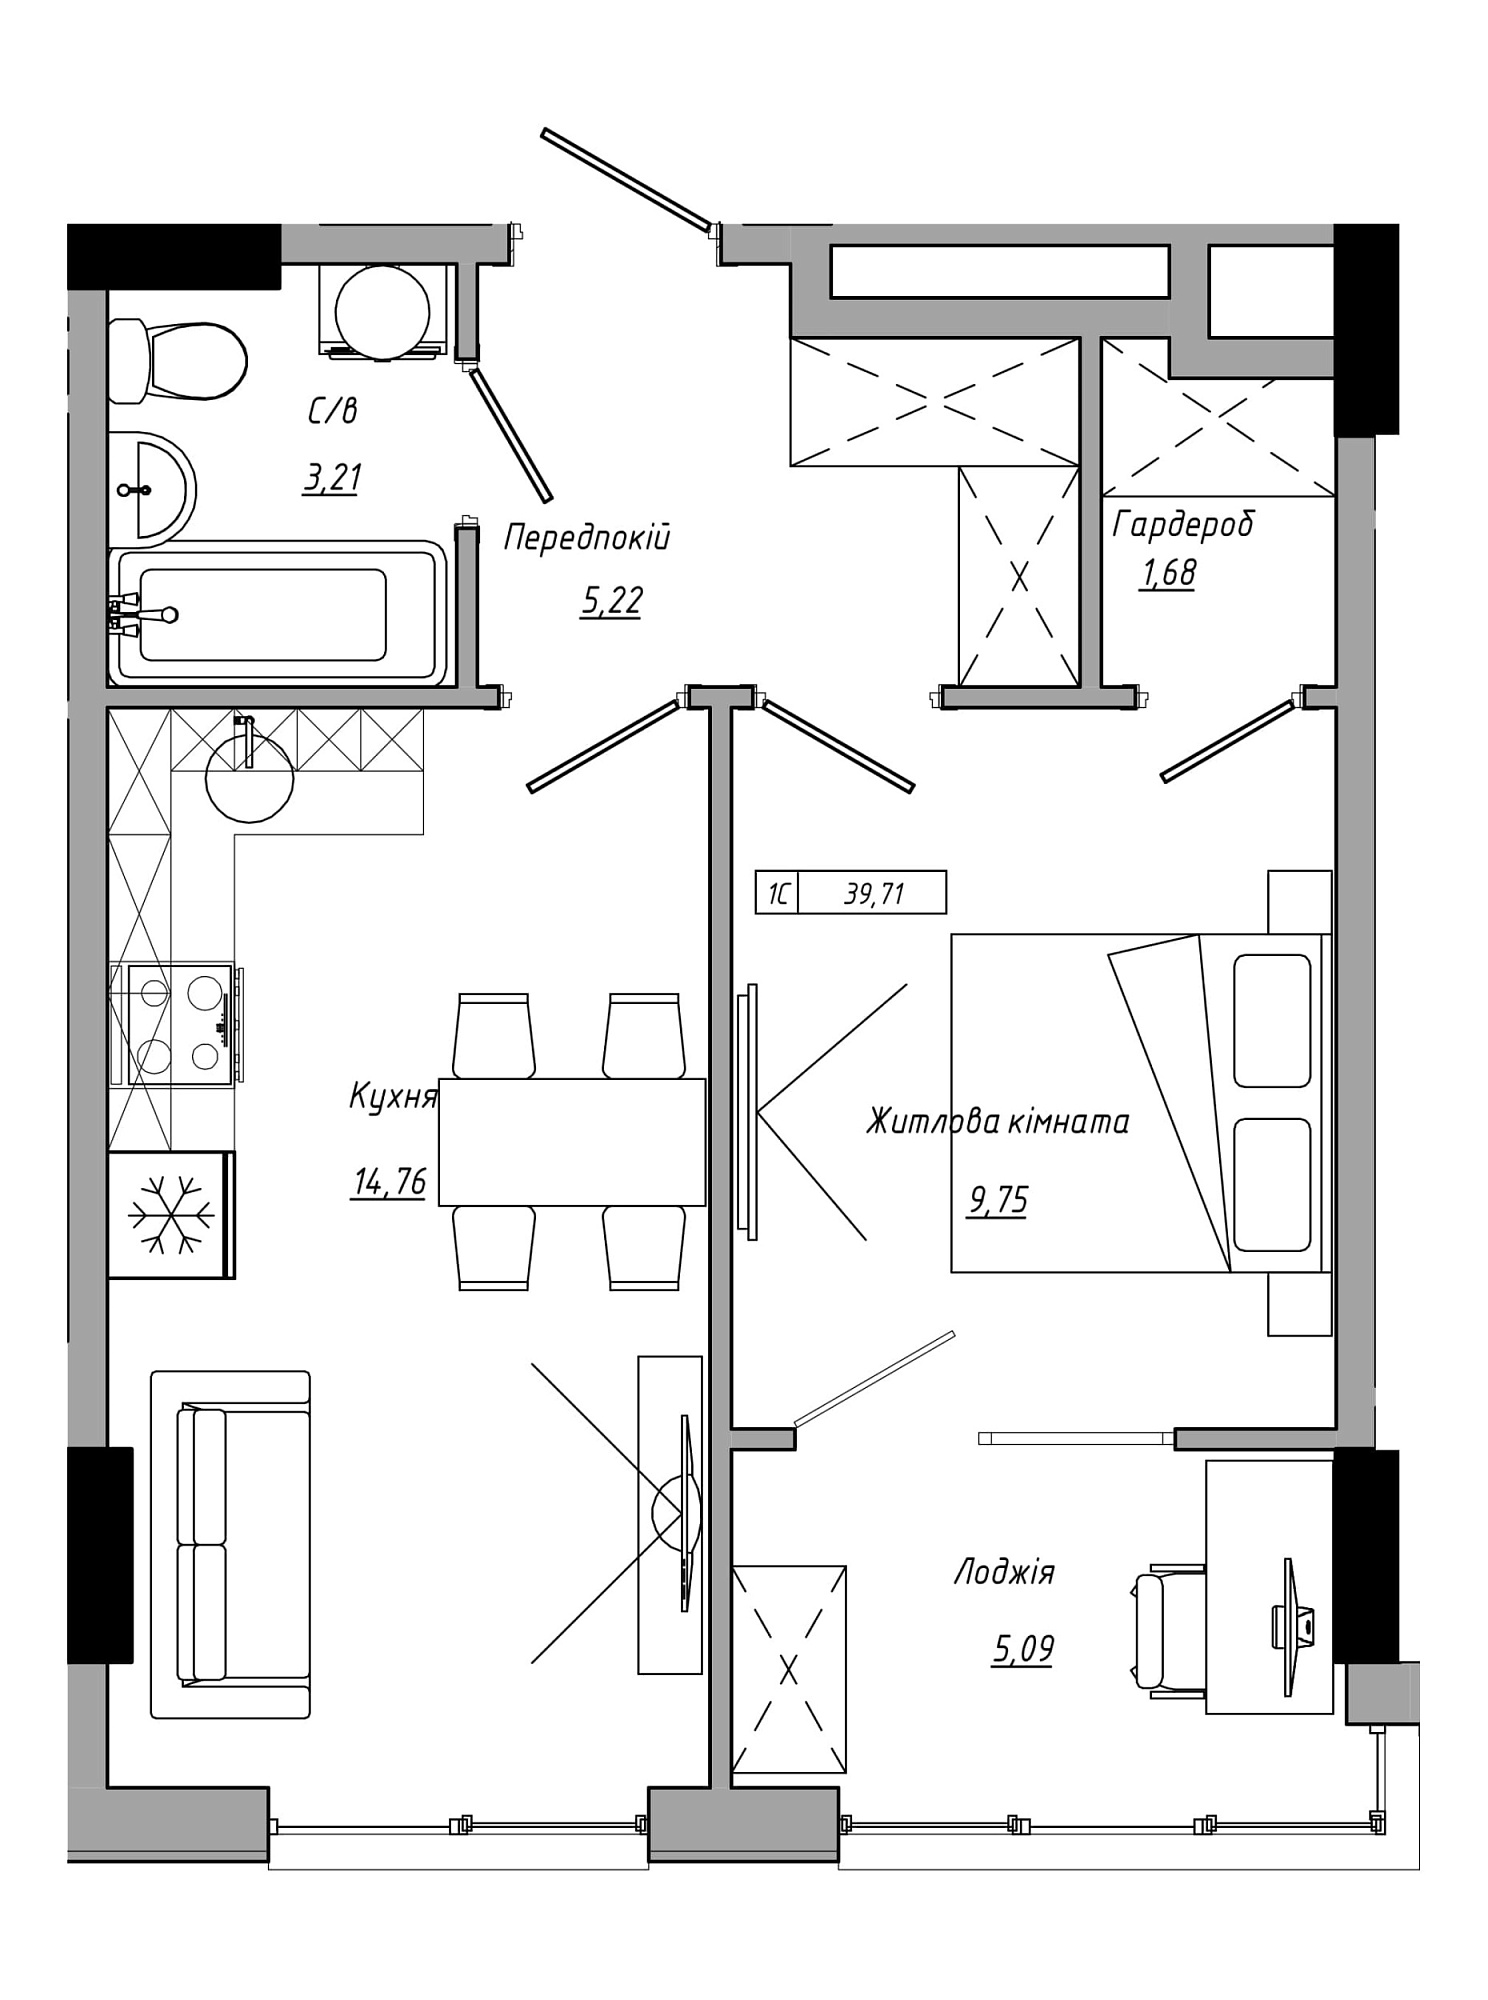 Planning 1-rm flats area 39.71m2, AB-21-08/00021.